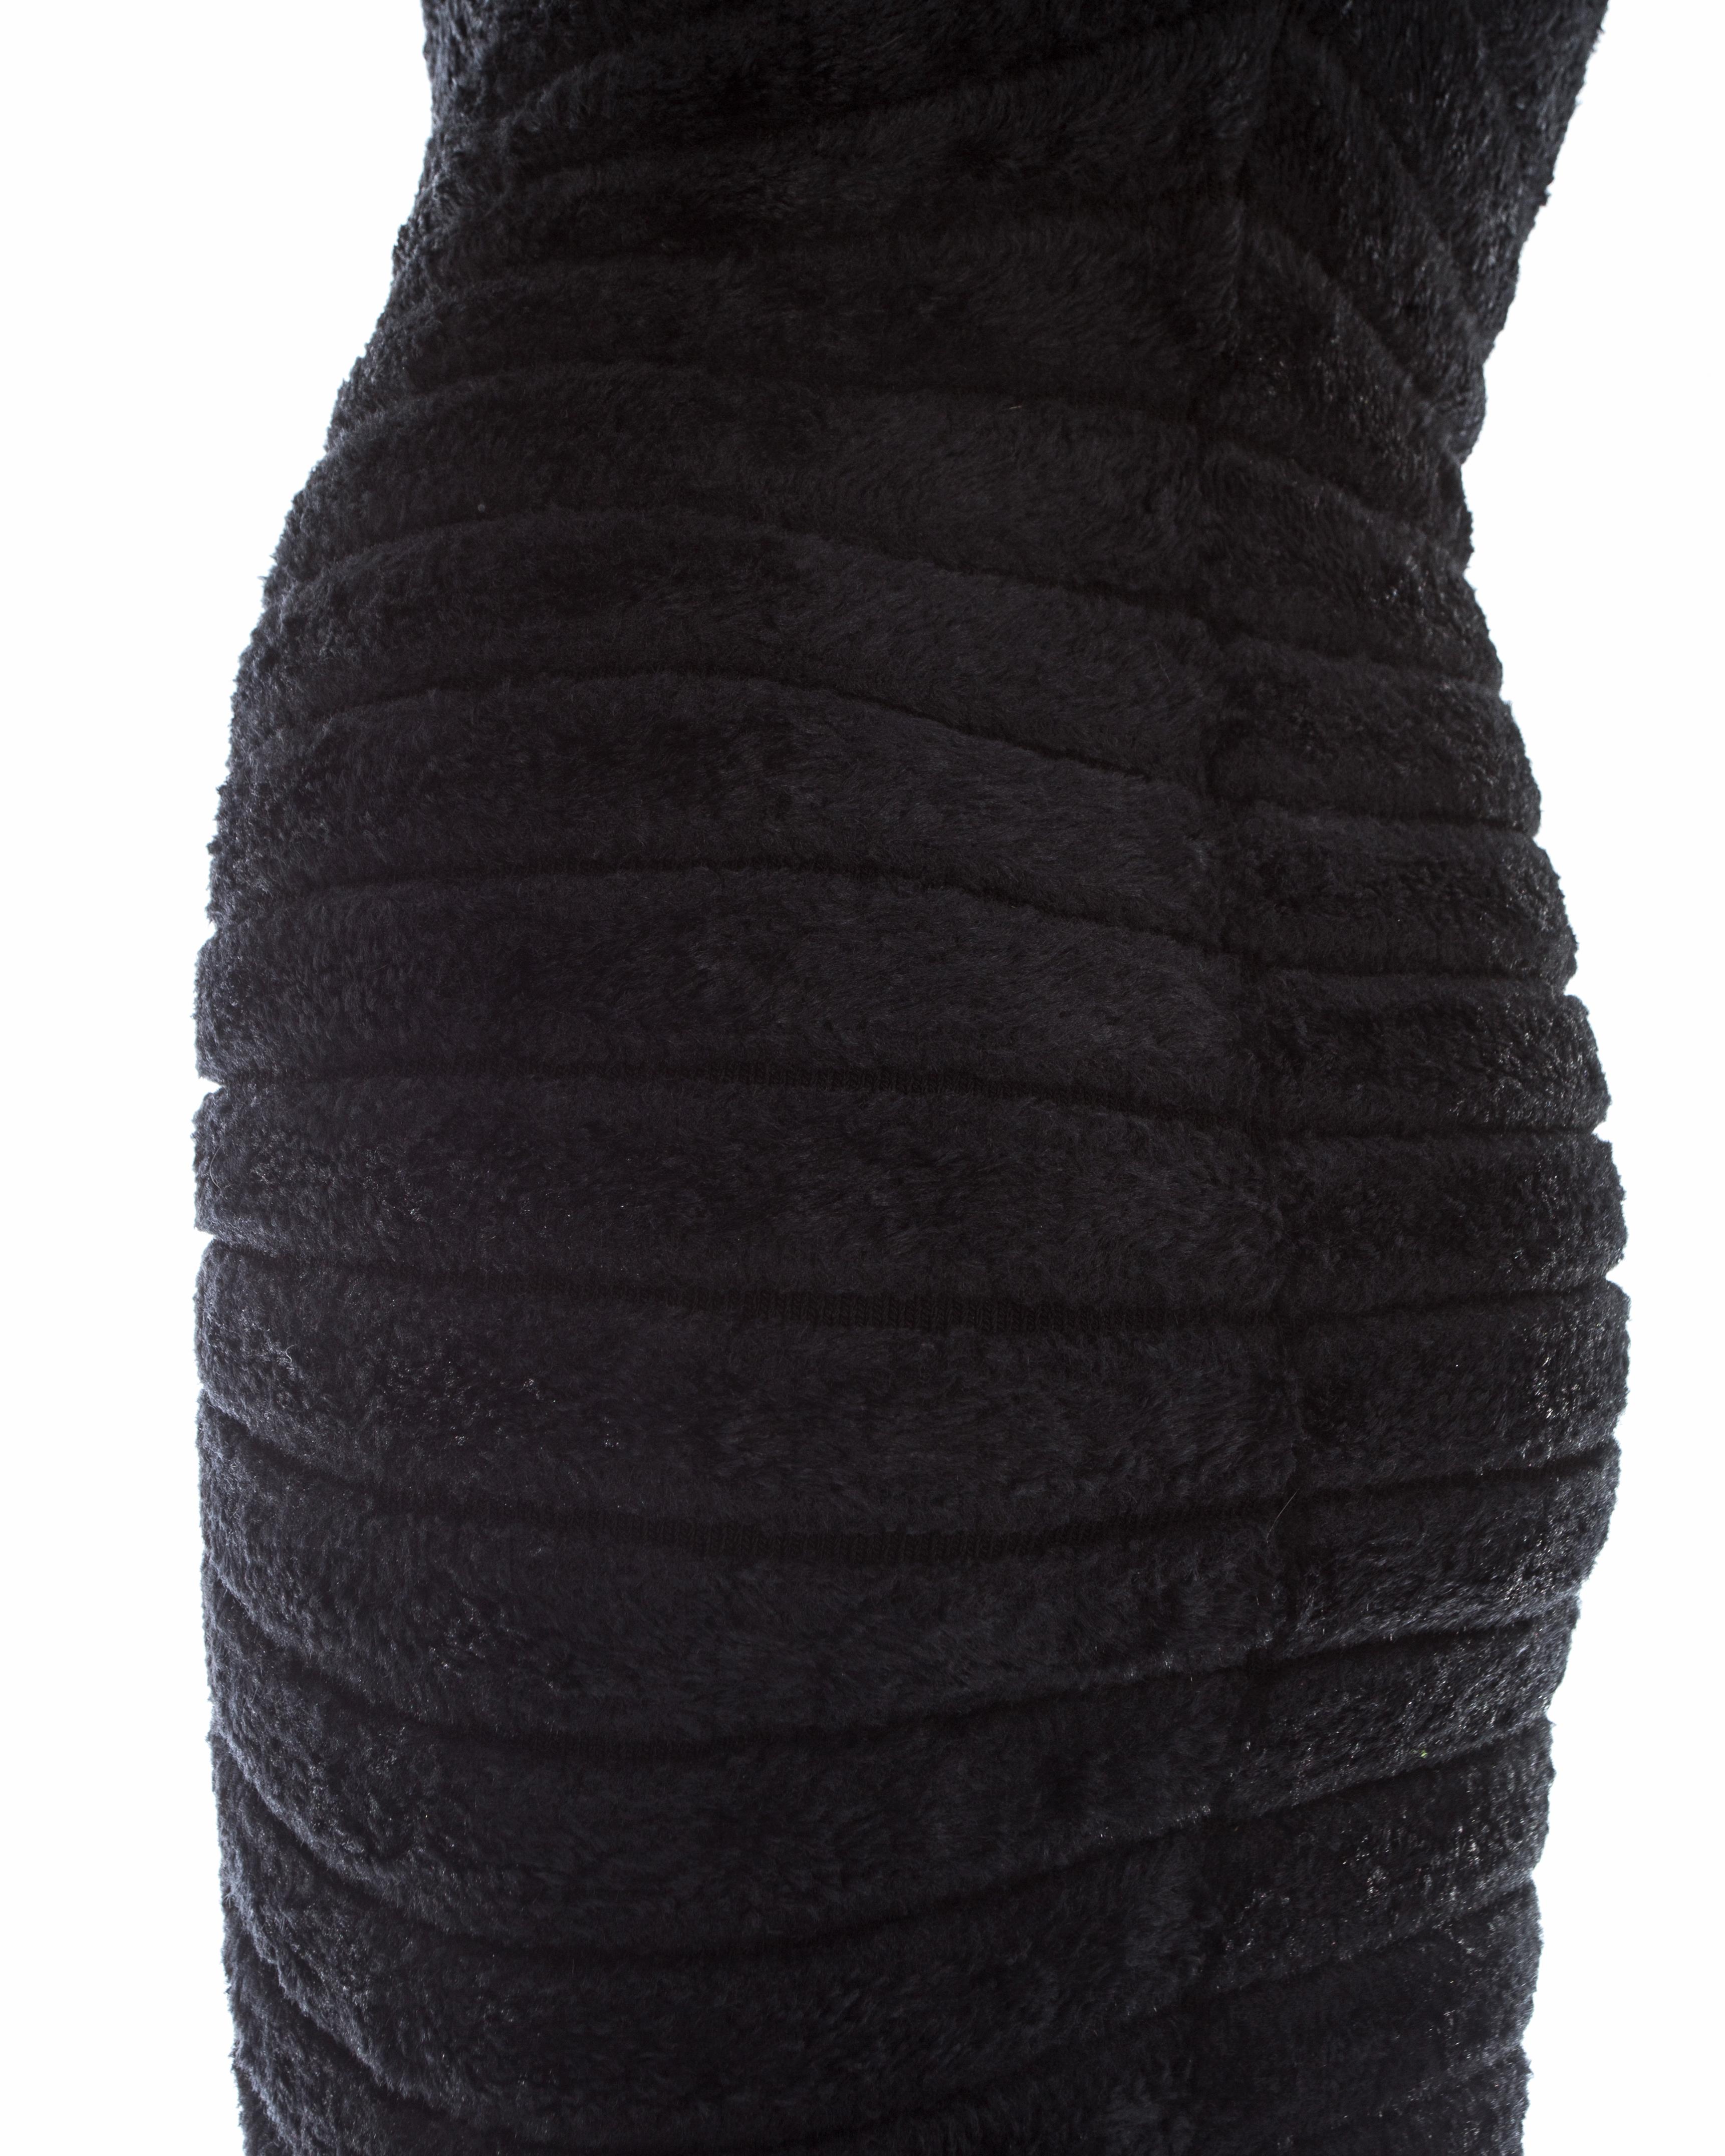 Azzedine Alaia black chenille-knitted 'Houpette' dress, ss 1994 For Sale 1